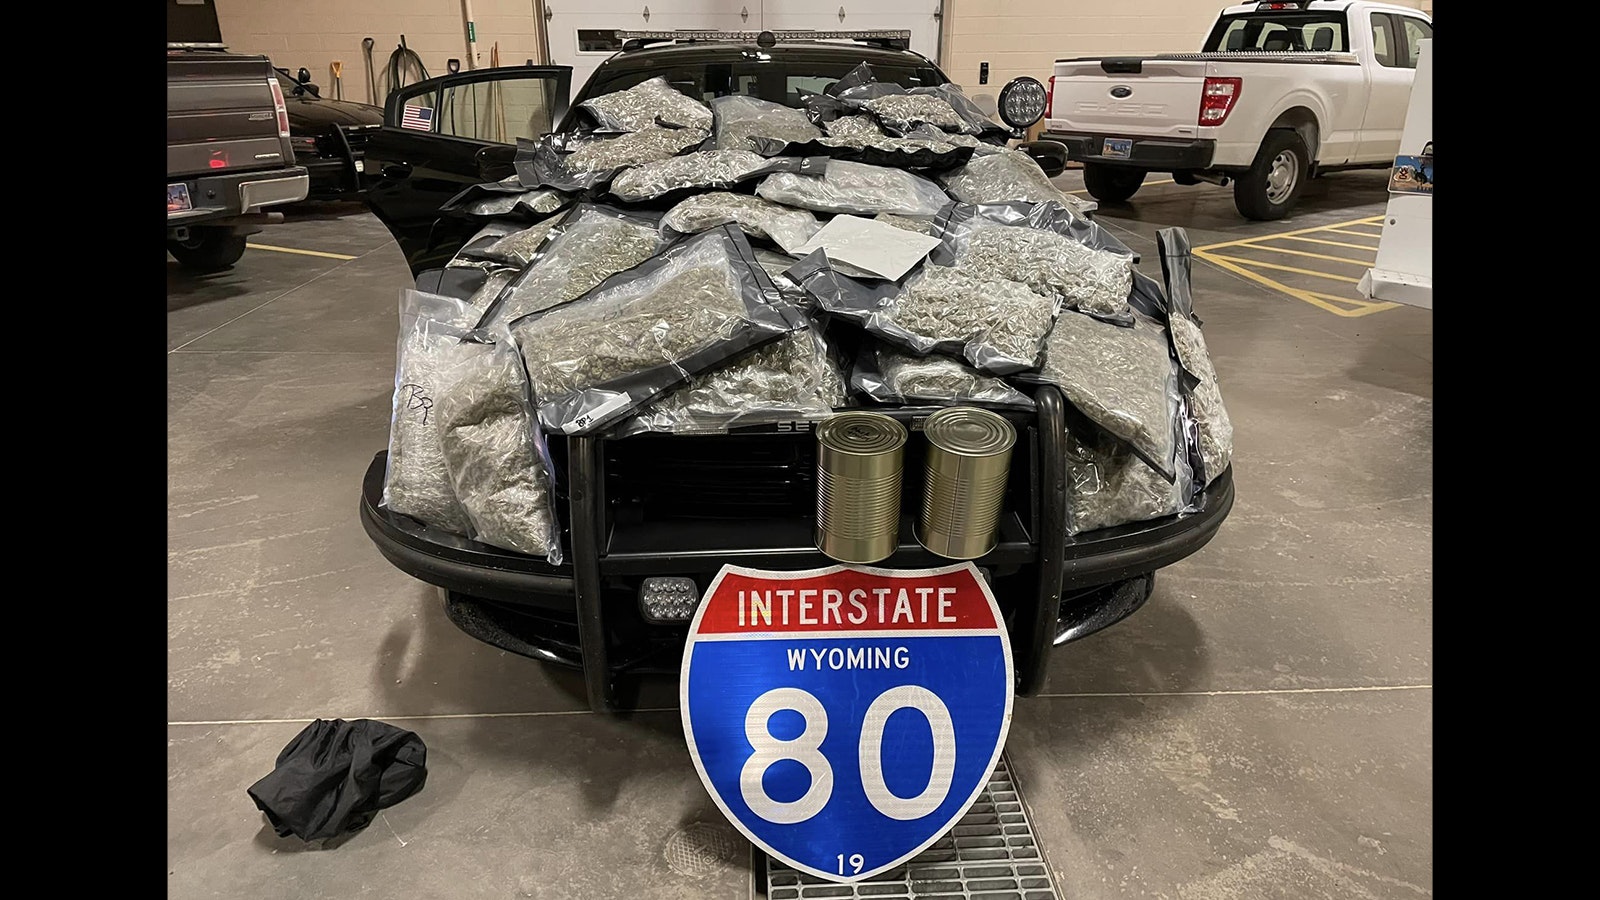 Nearly 70 pounds of marijuana was found in a stolen Dodge Charger that led Wyoming Highway Patrol troopers on a chase at speeds up to 160 mph.